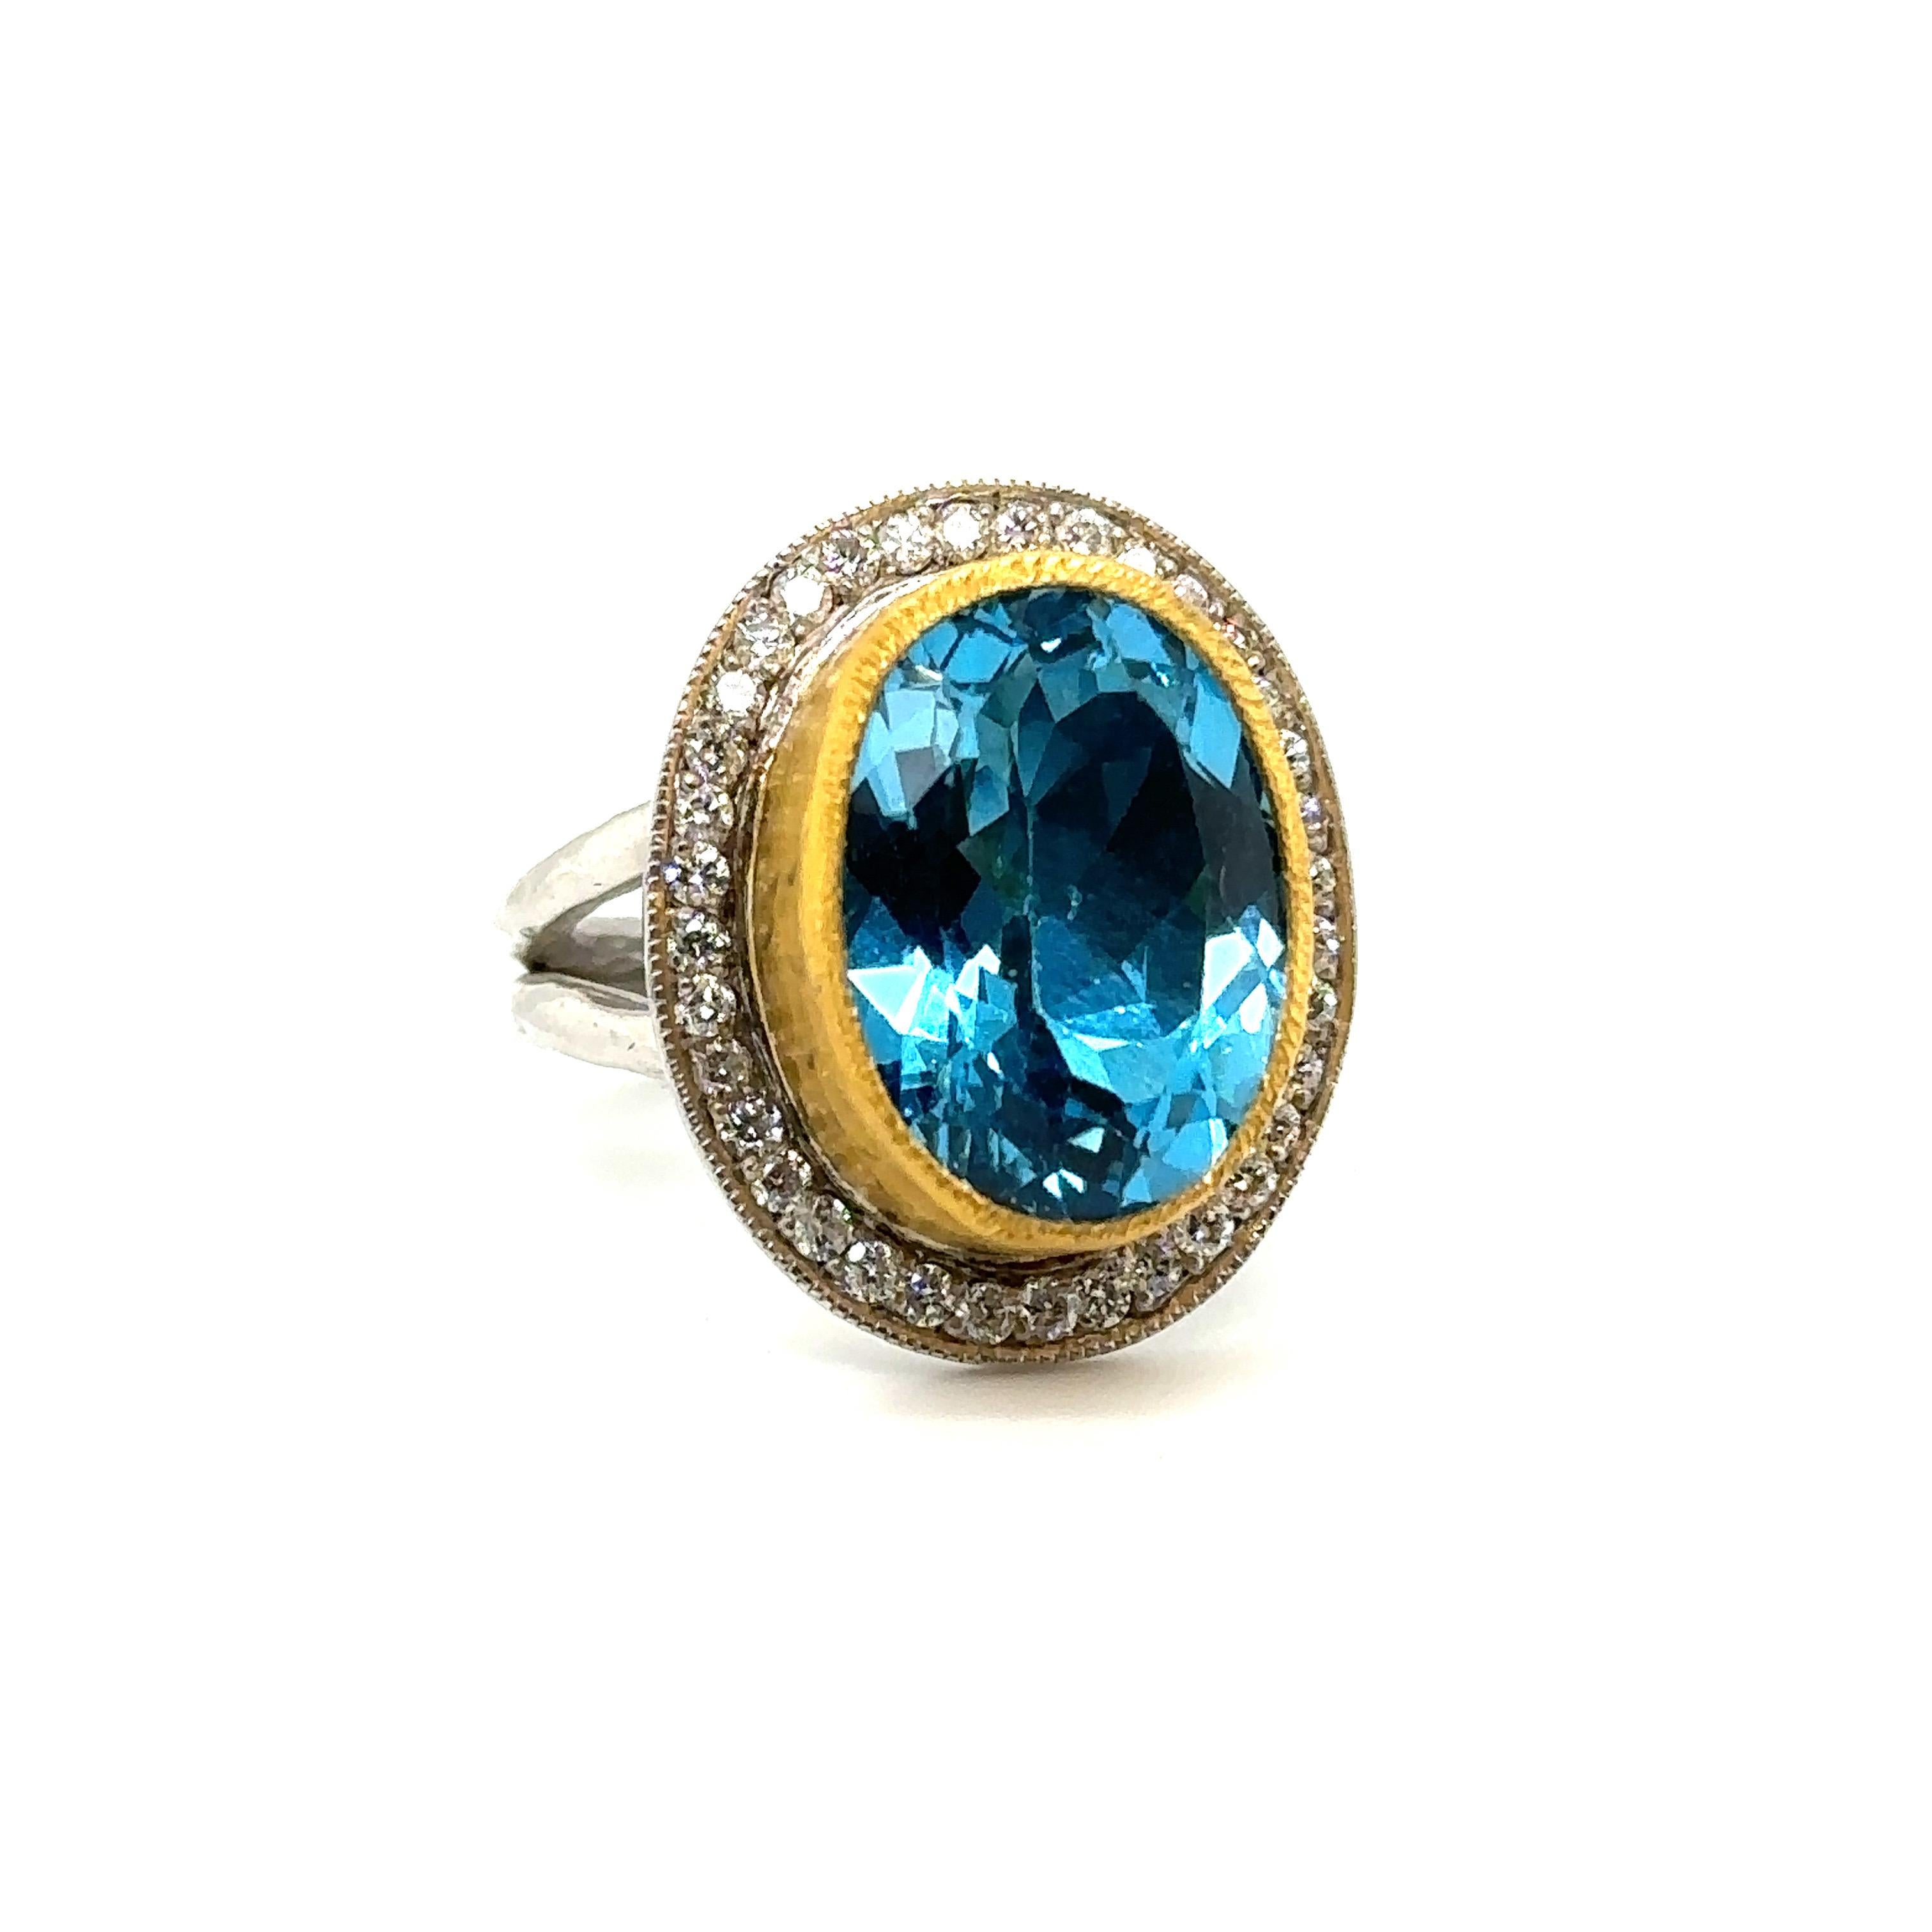 JAS-22-305 - 24K GOLD/STERLING SILVER RING with DIAMONDS AND SWISS BLUE TOPAZ In New Condition For Sale In New York, NY